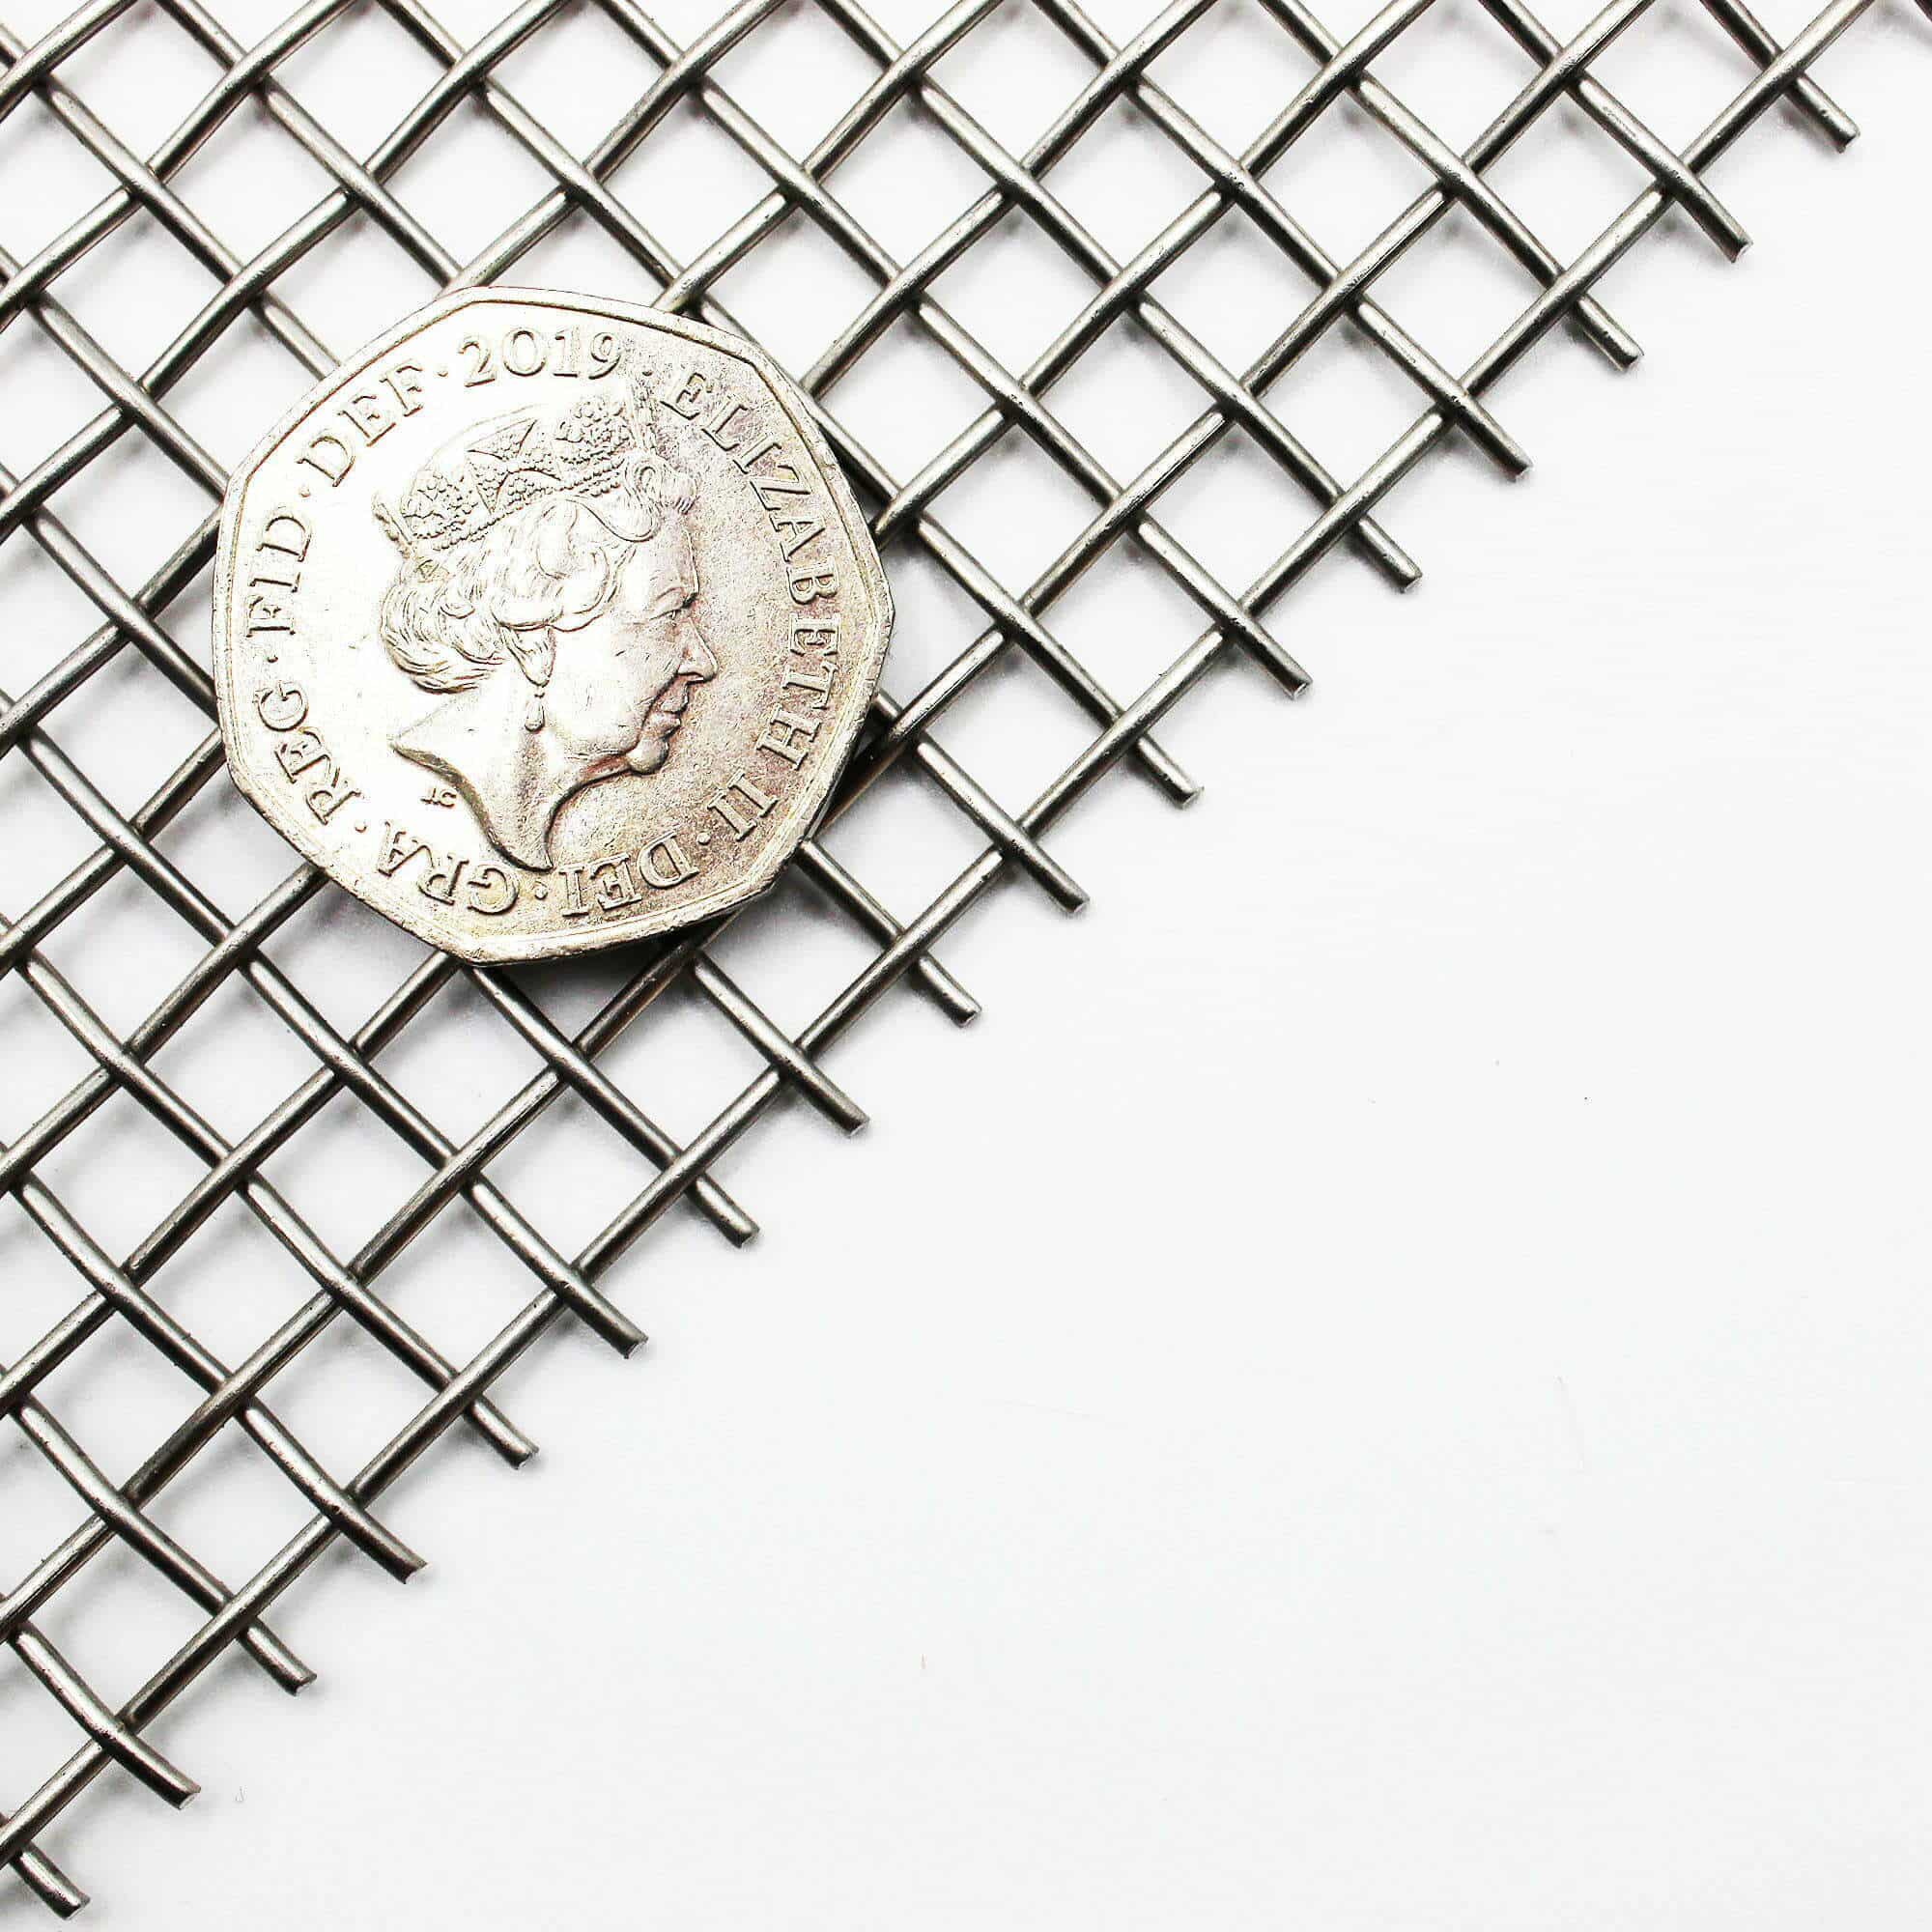 How do you Join or Weld your Stainless Steel Wire and Mesh?